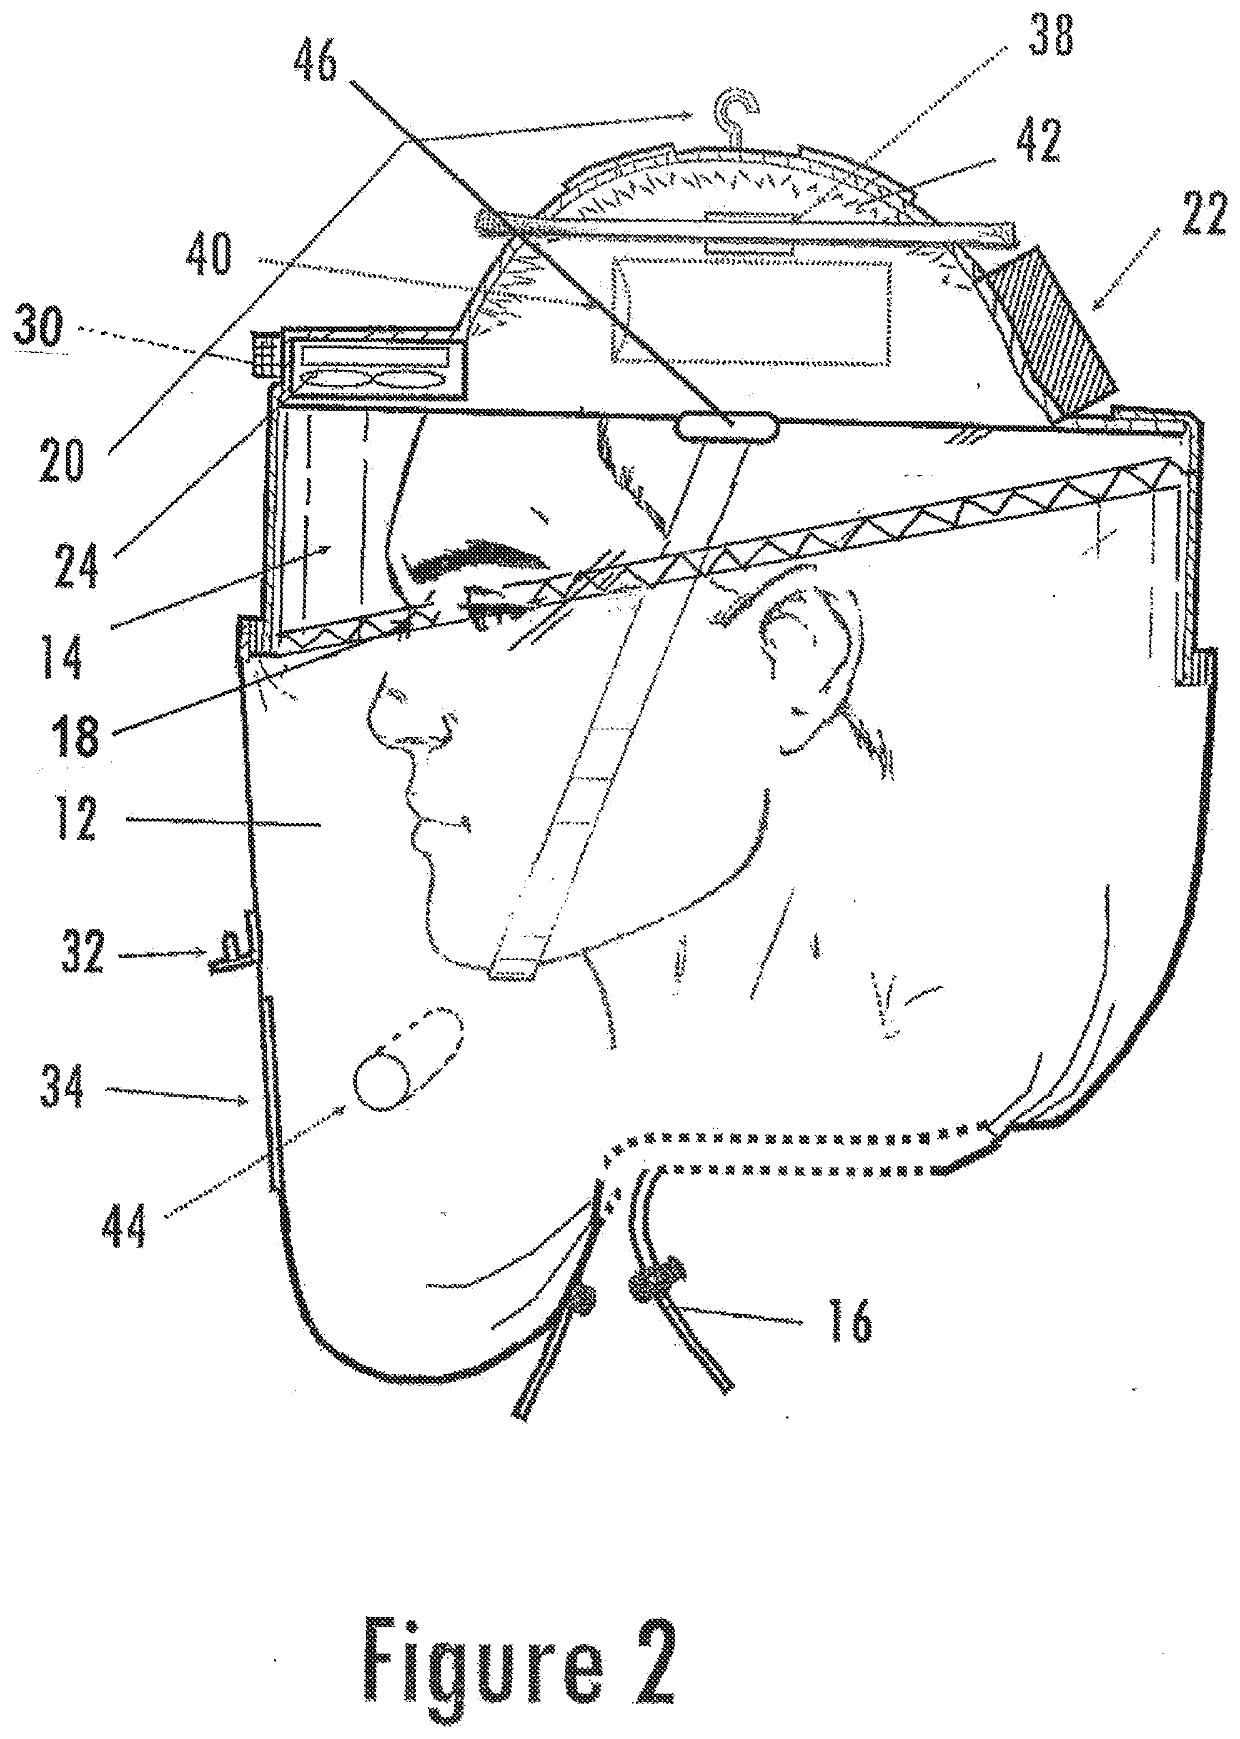 Particle protection headwear apparatus